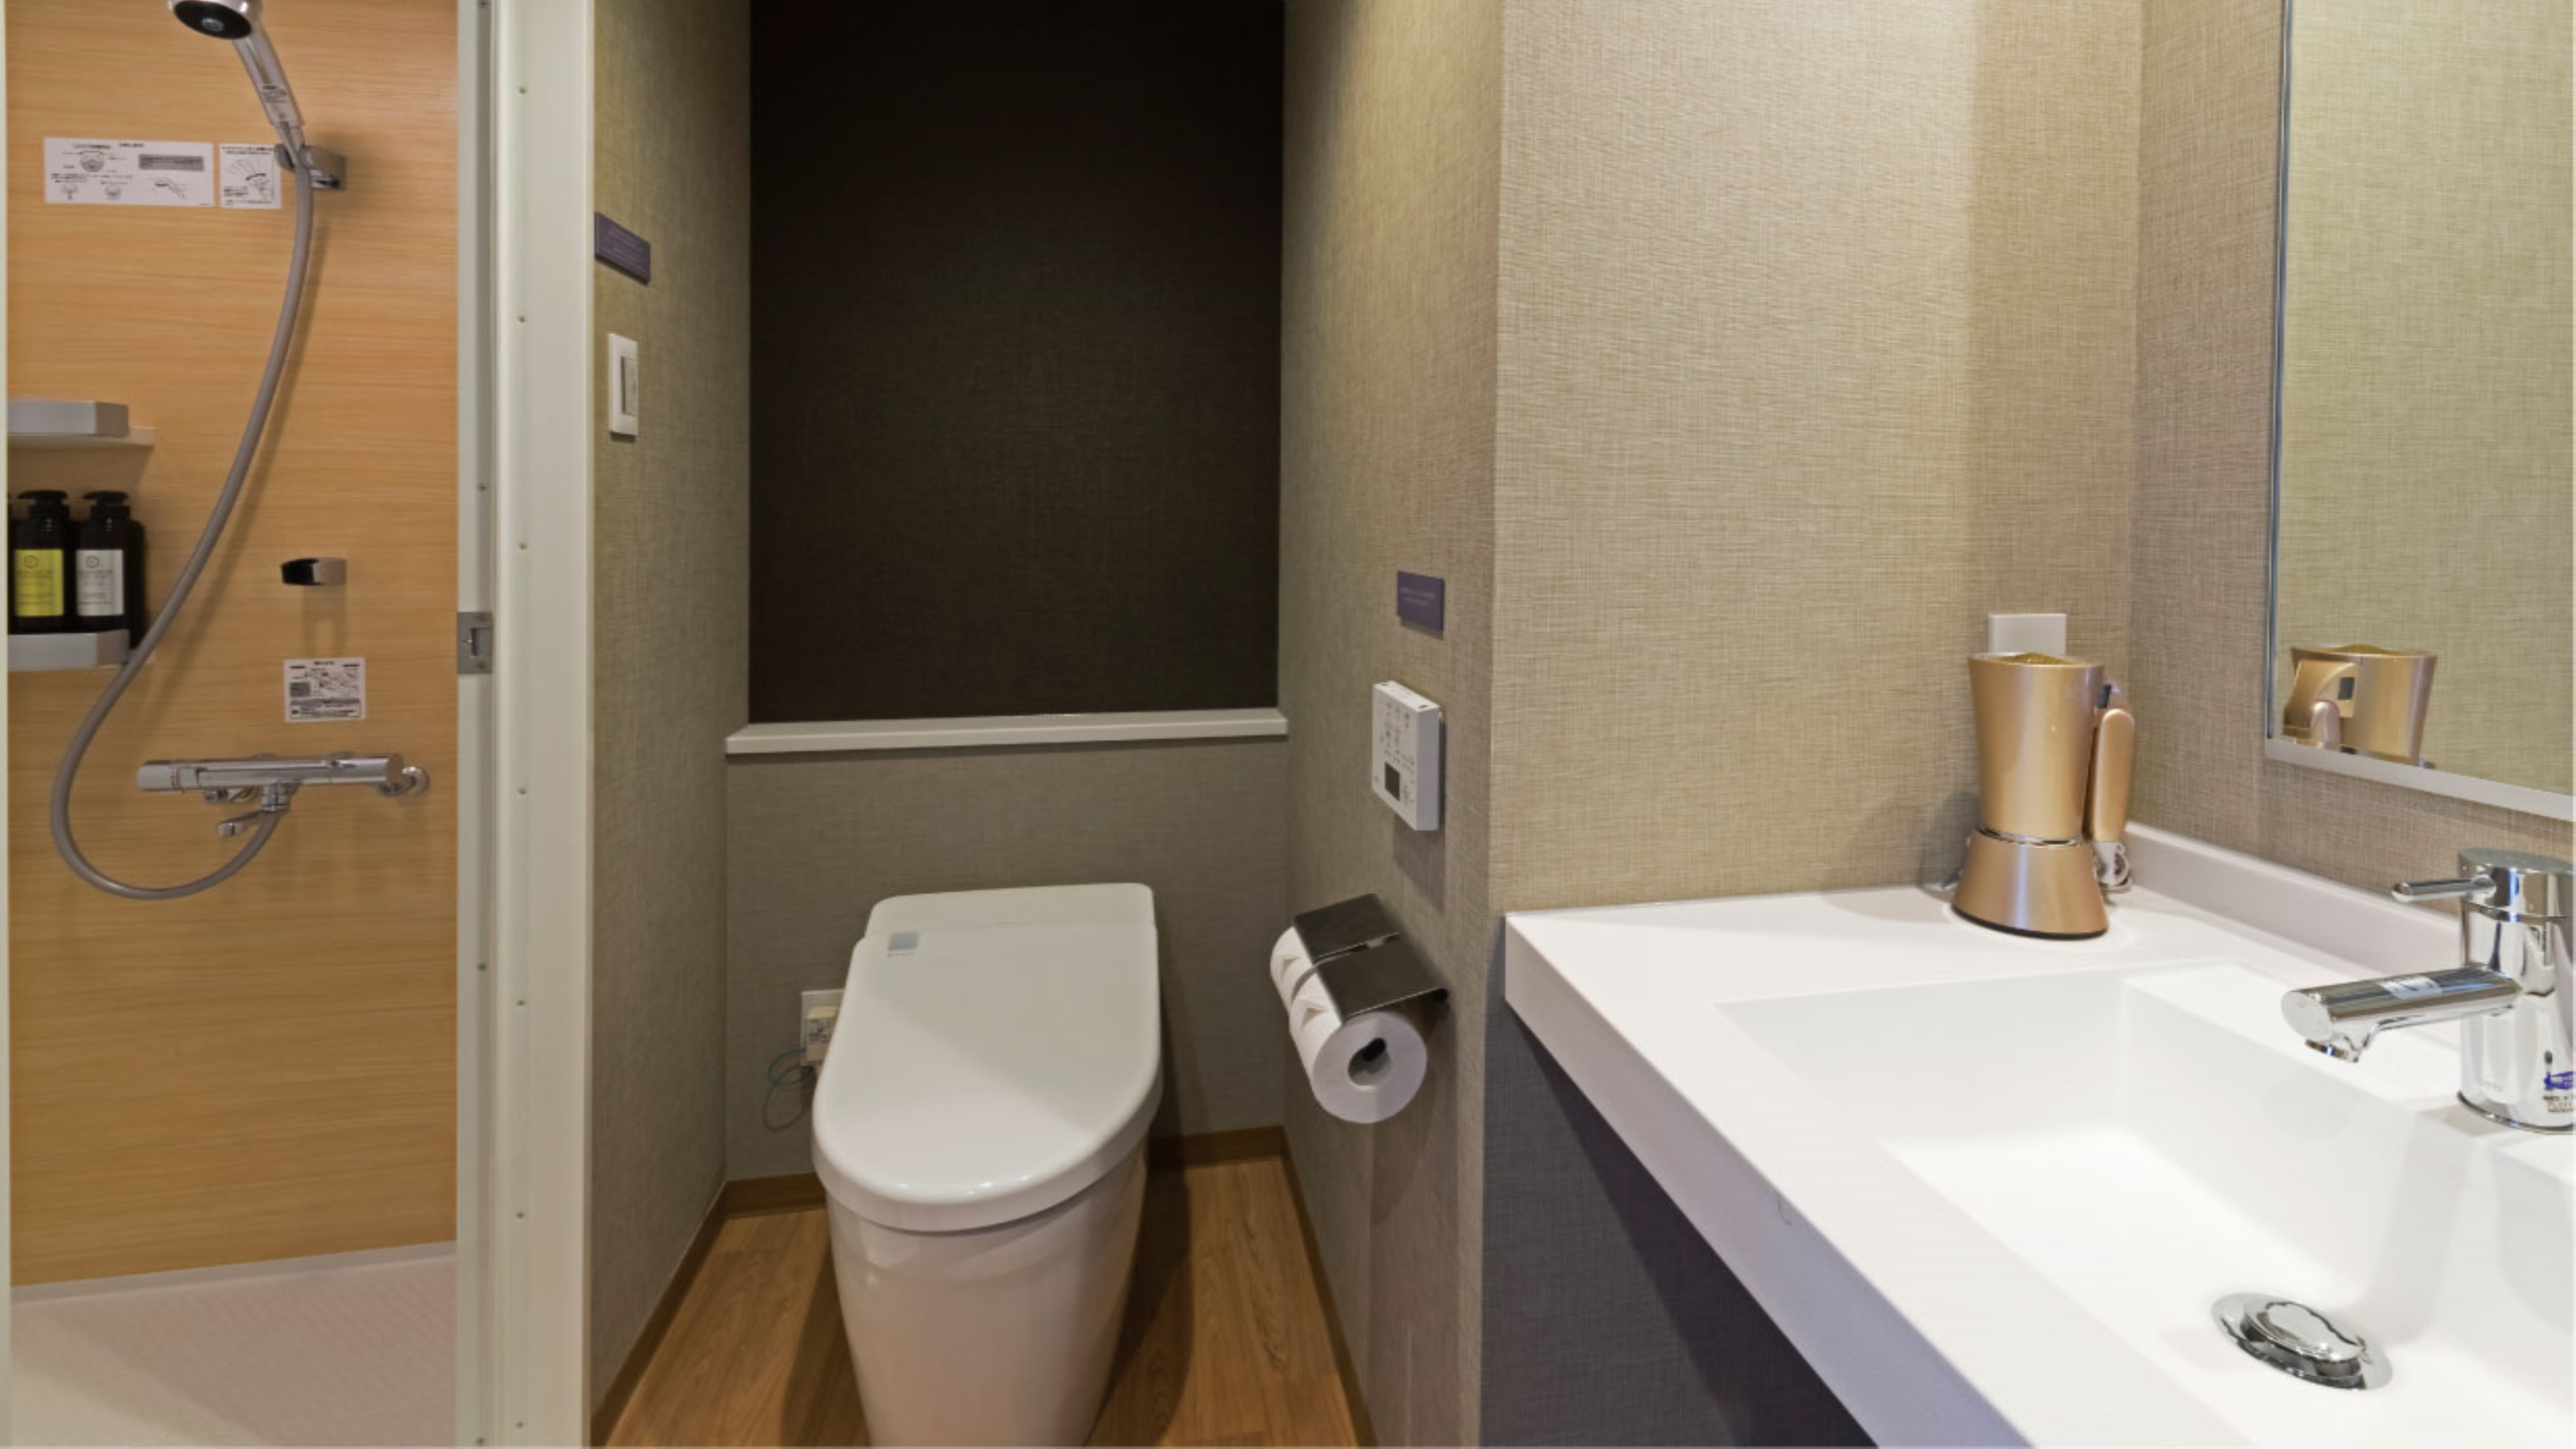 Single room / Semi-double room / Economy twin room (restroom & shower booth)